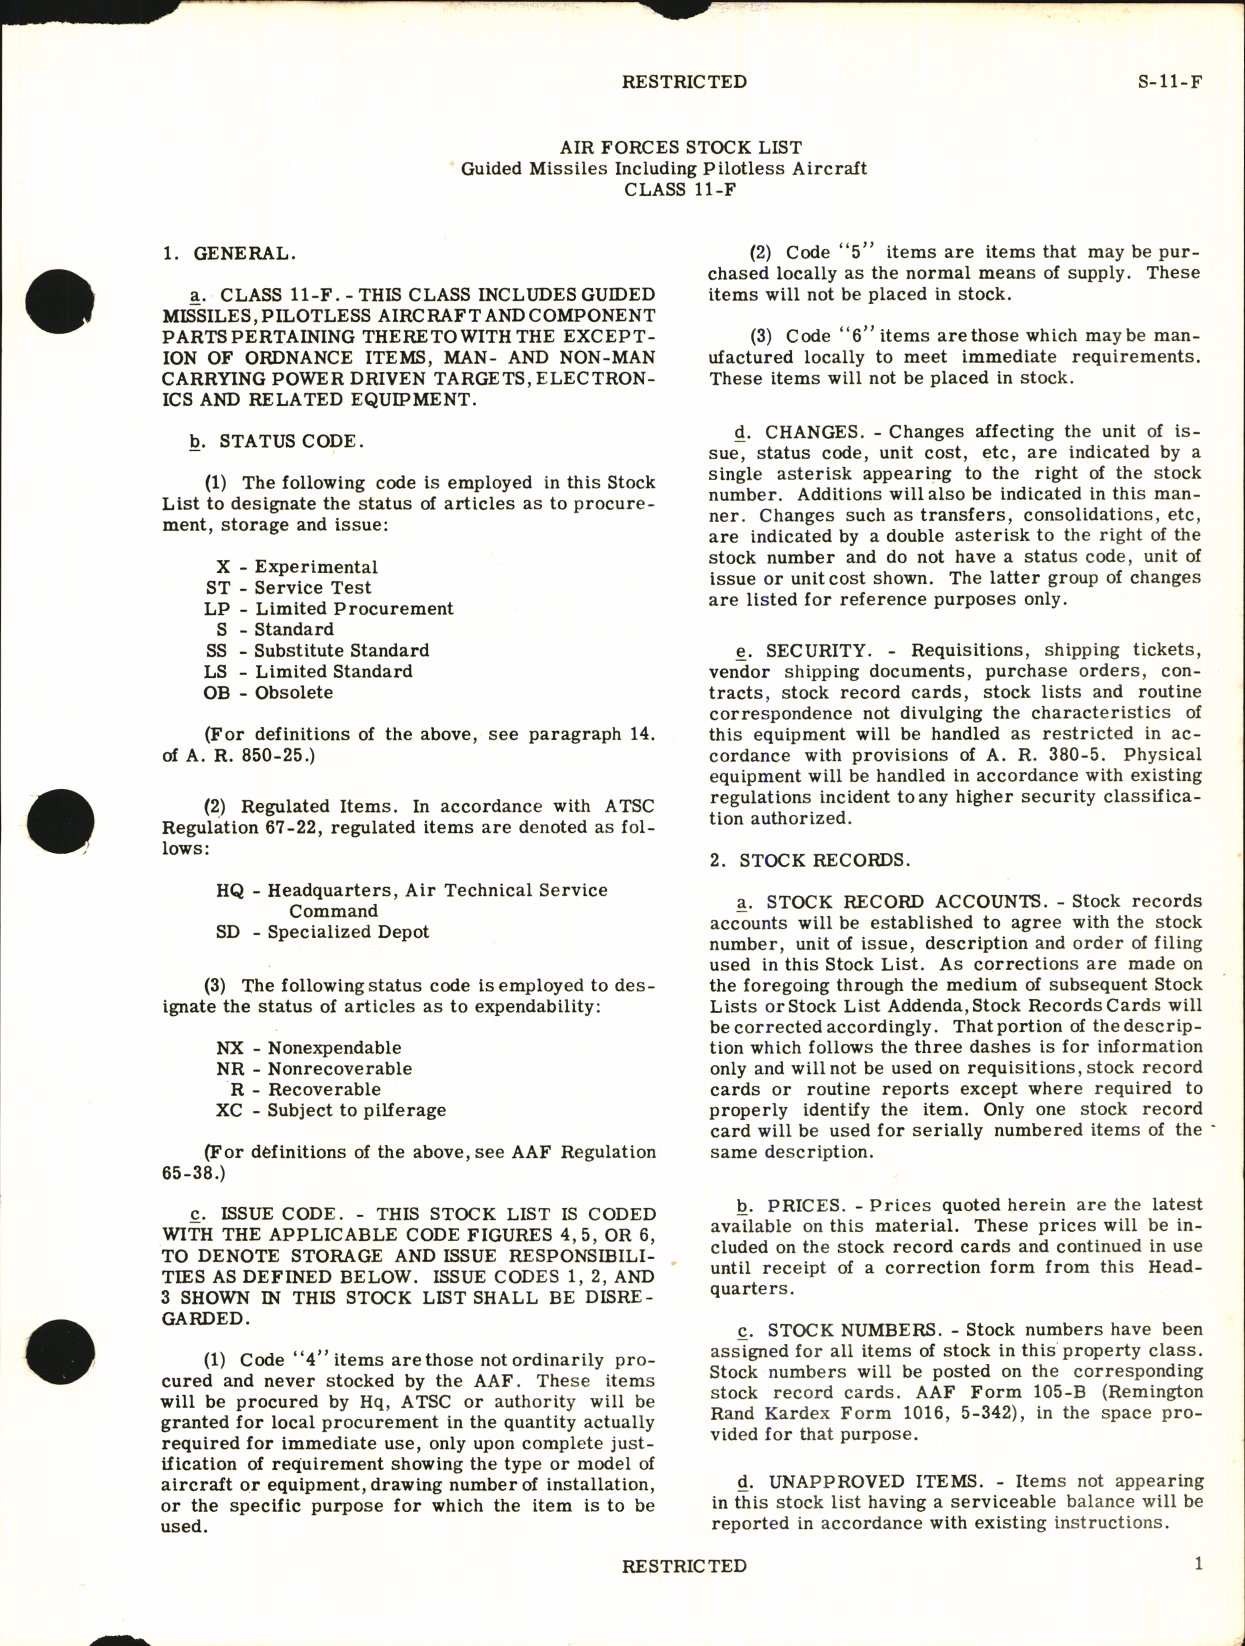 Sample page 3 from AirCorps Library document: Stock List Guided Missiles Including Pilotless Aircraft